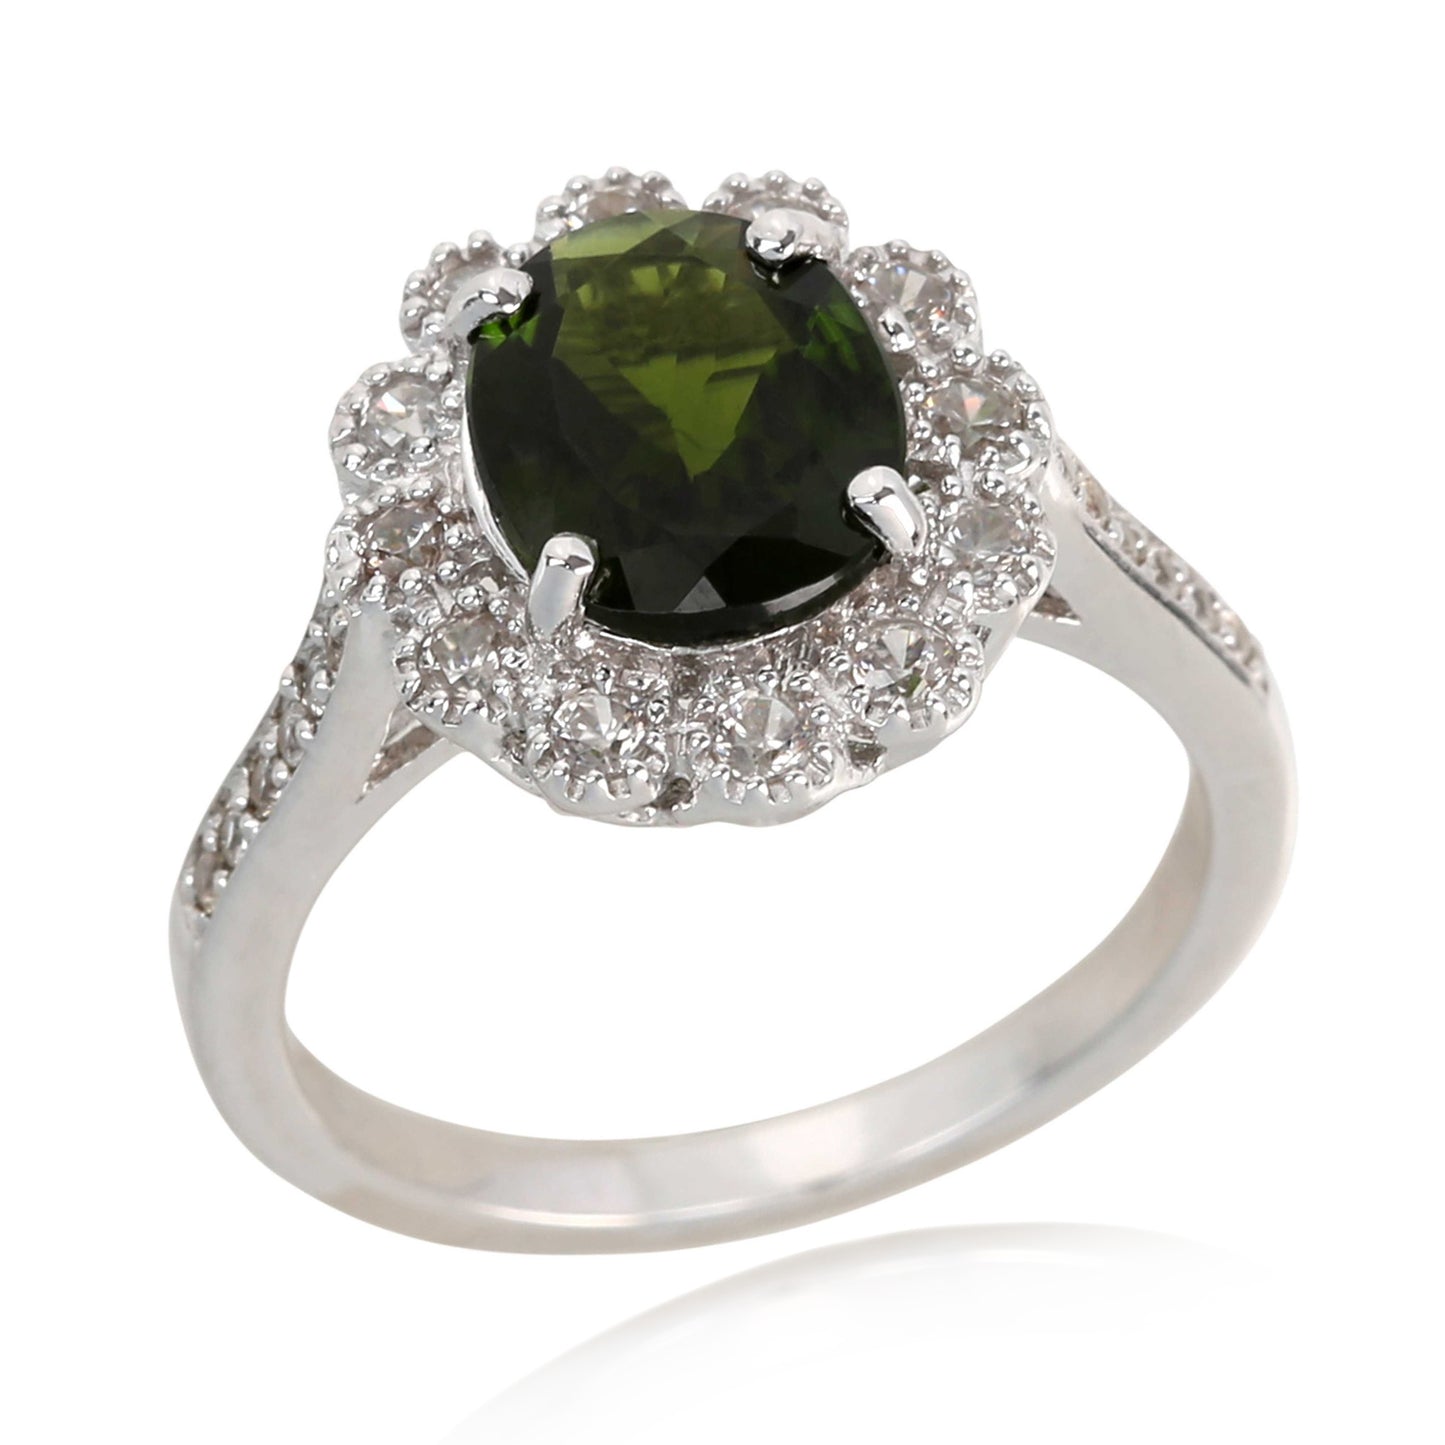 Sterling Silver 925 Chrome Diopside, White Natural Zircon Ring - Pinctore